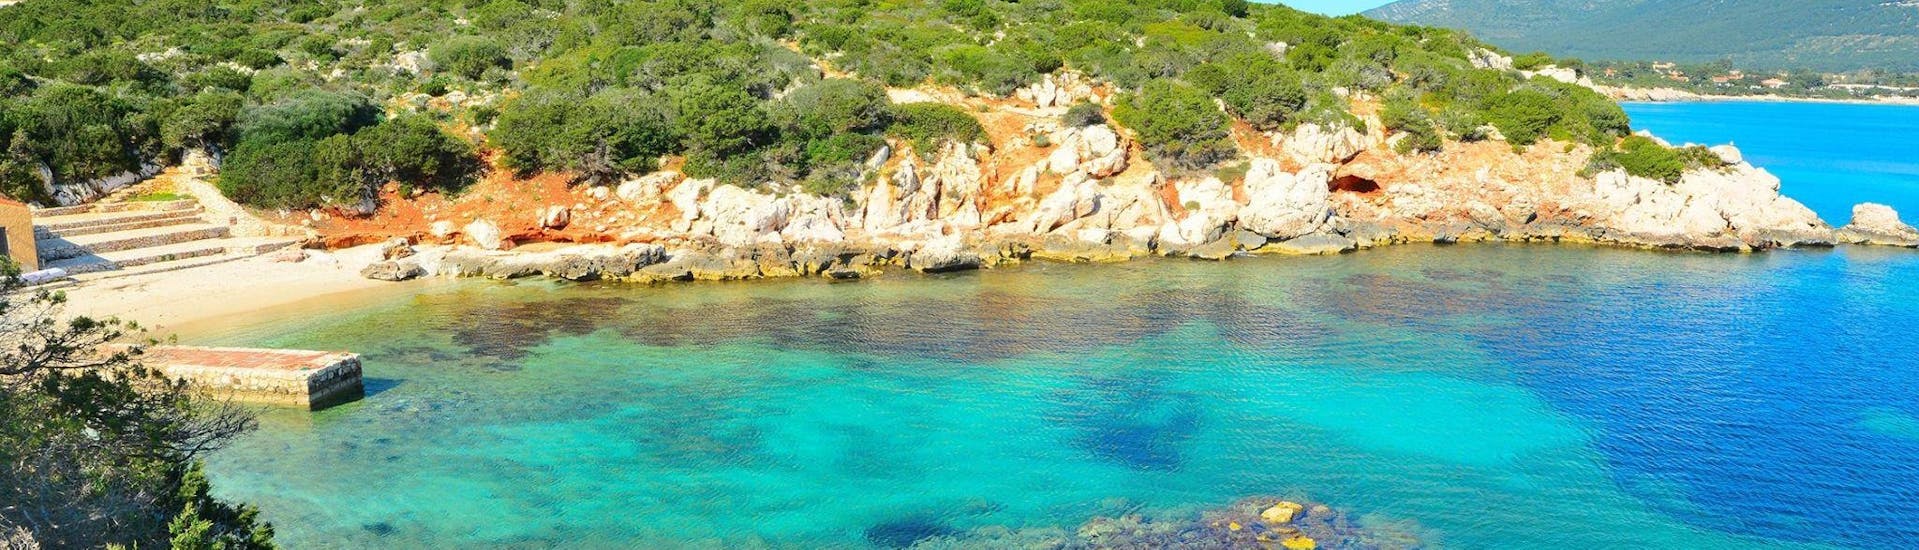 One of the most beautiful beaches on the Coral Riviera can be visited during our boat trip from Alghero to the Caves of Neptune with lunch with Navisarda Alghero.